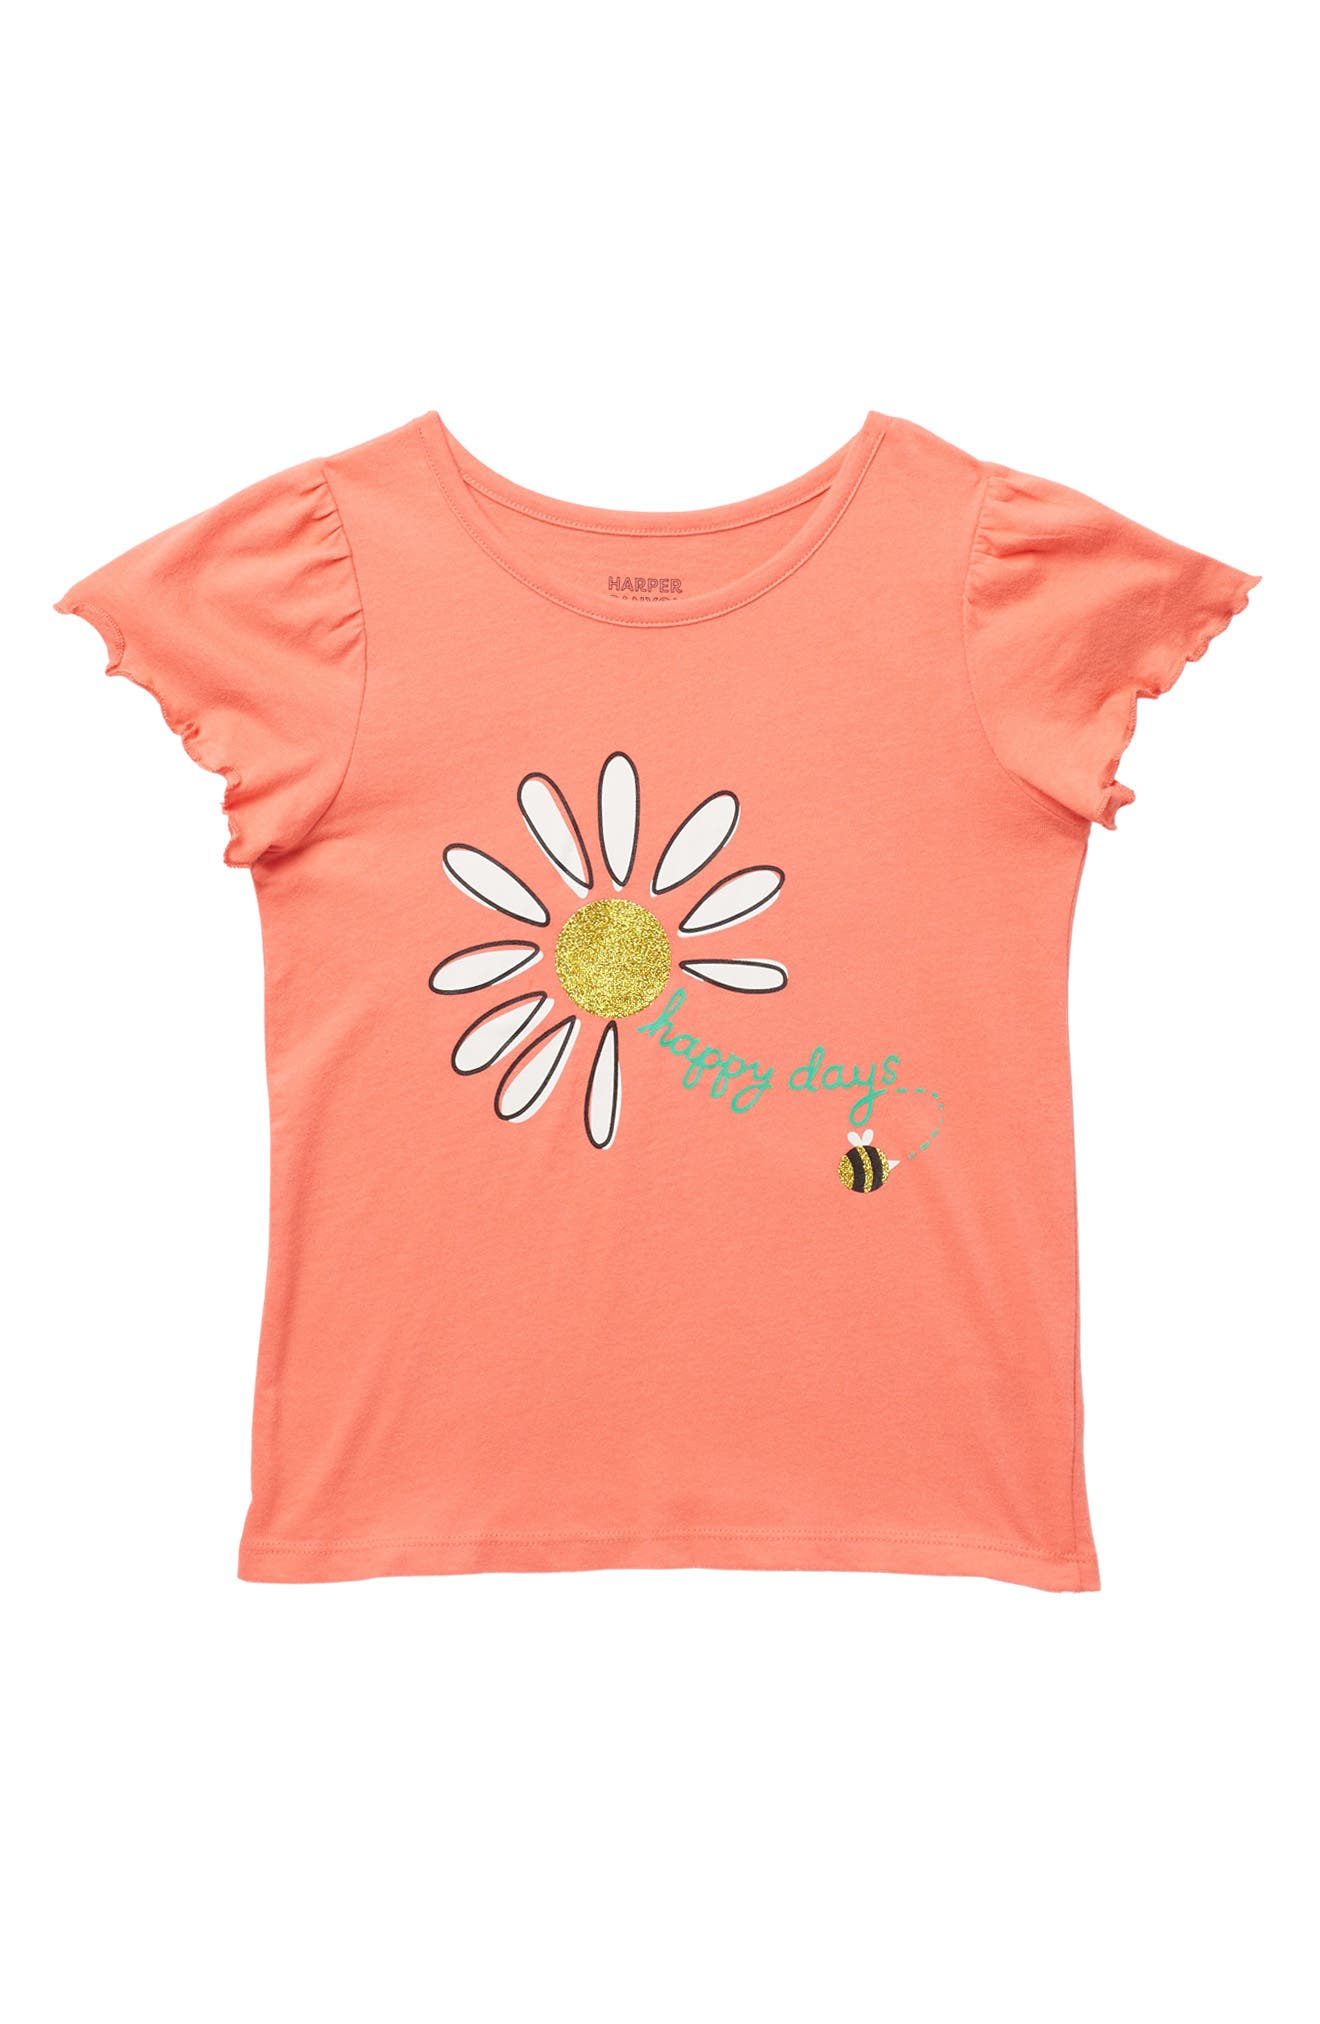 Harper Canyon Kids' Graphic T-shirt In Coral Glow Happy Days